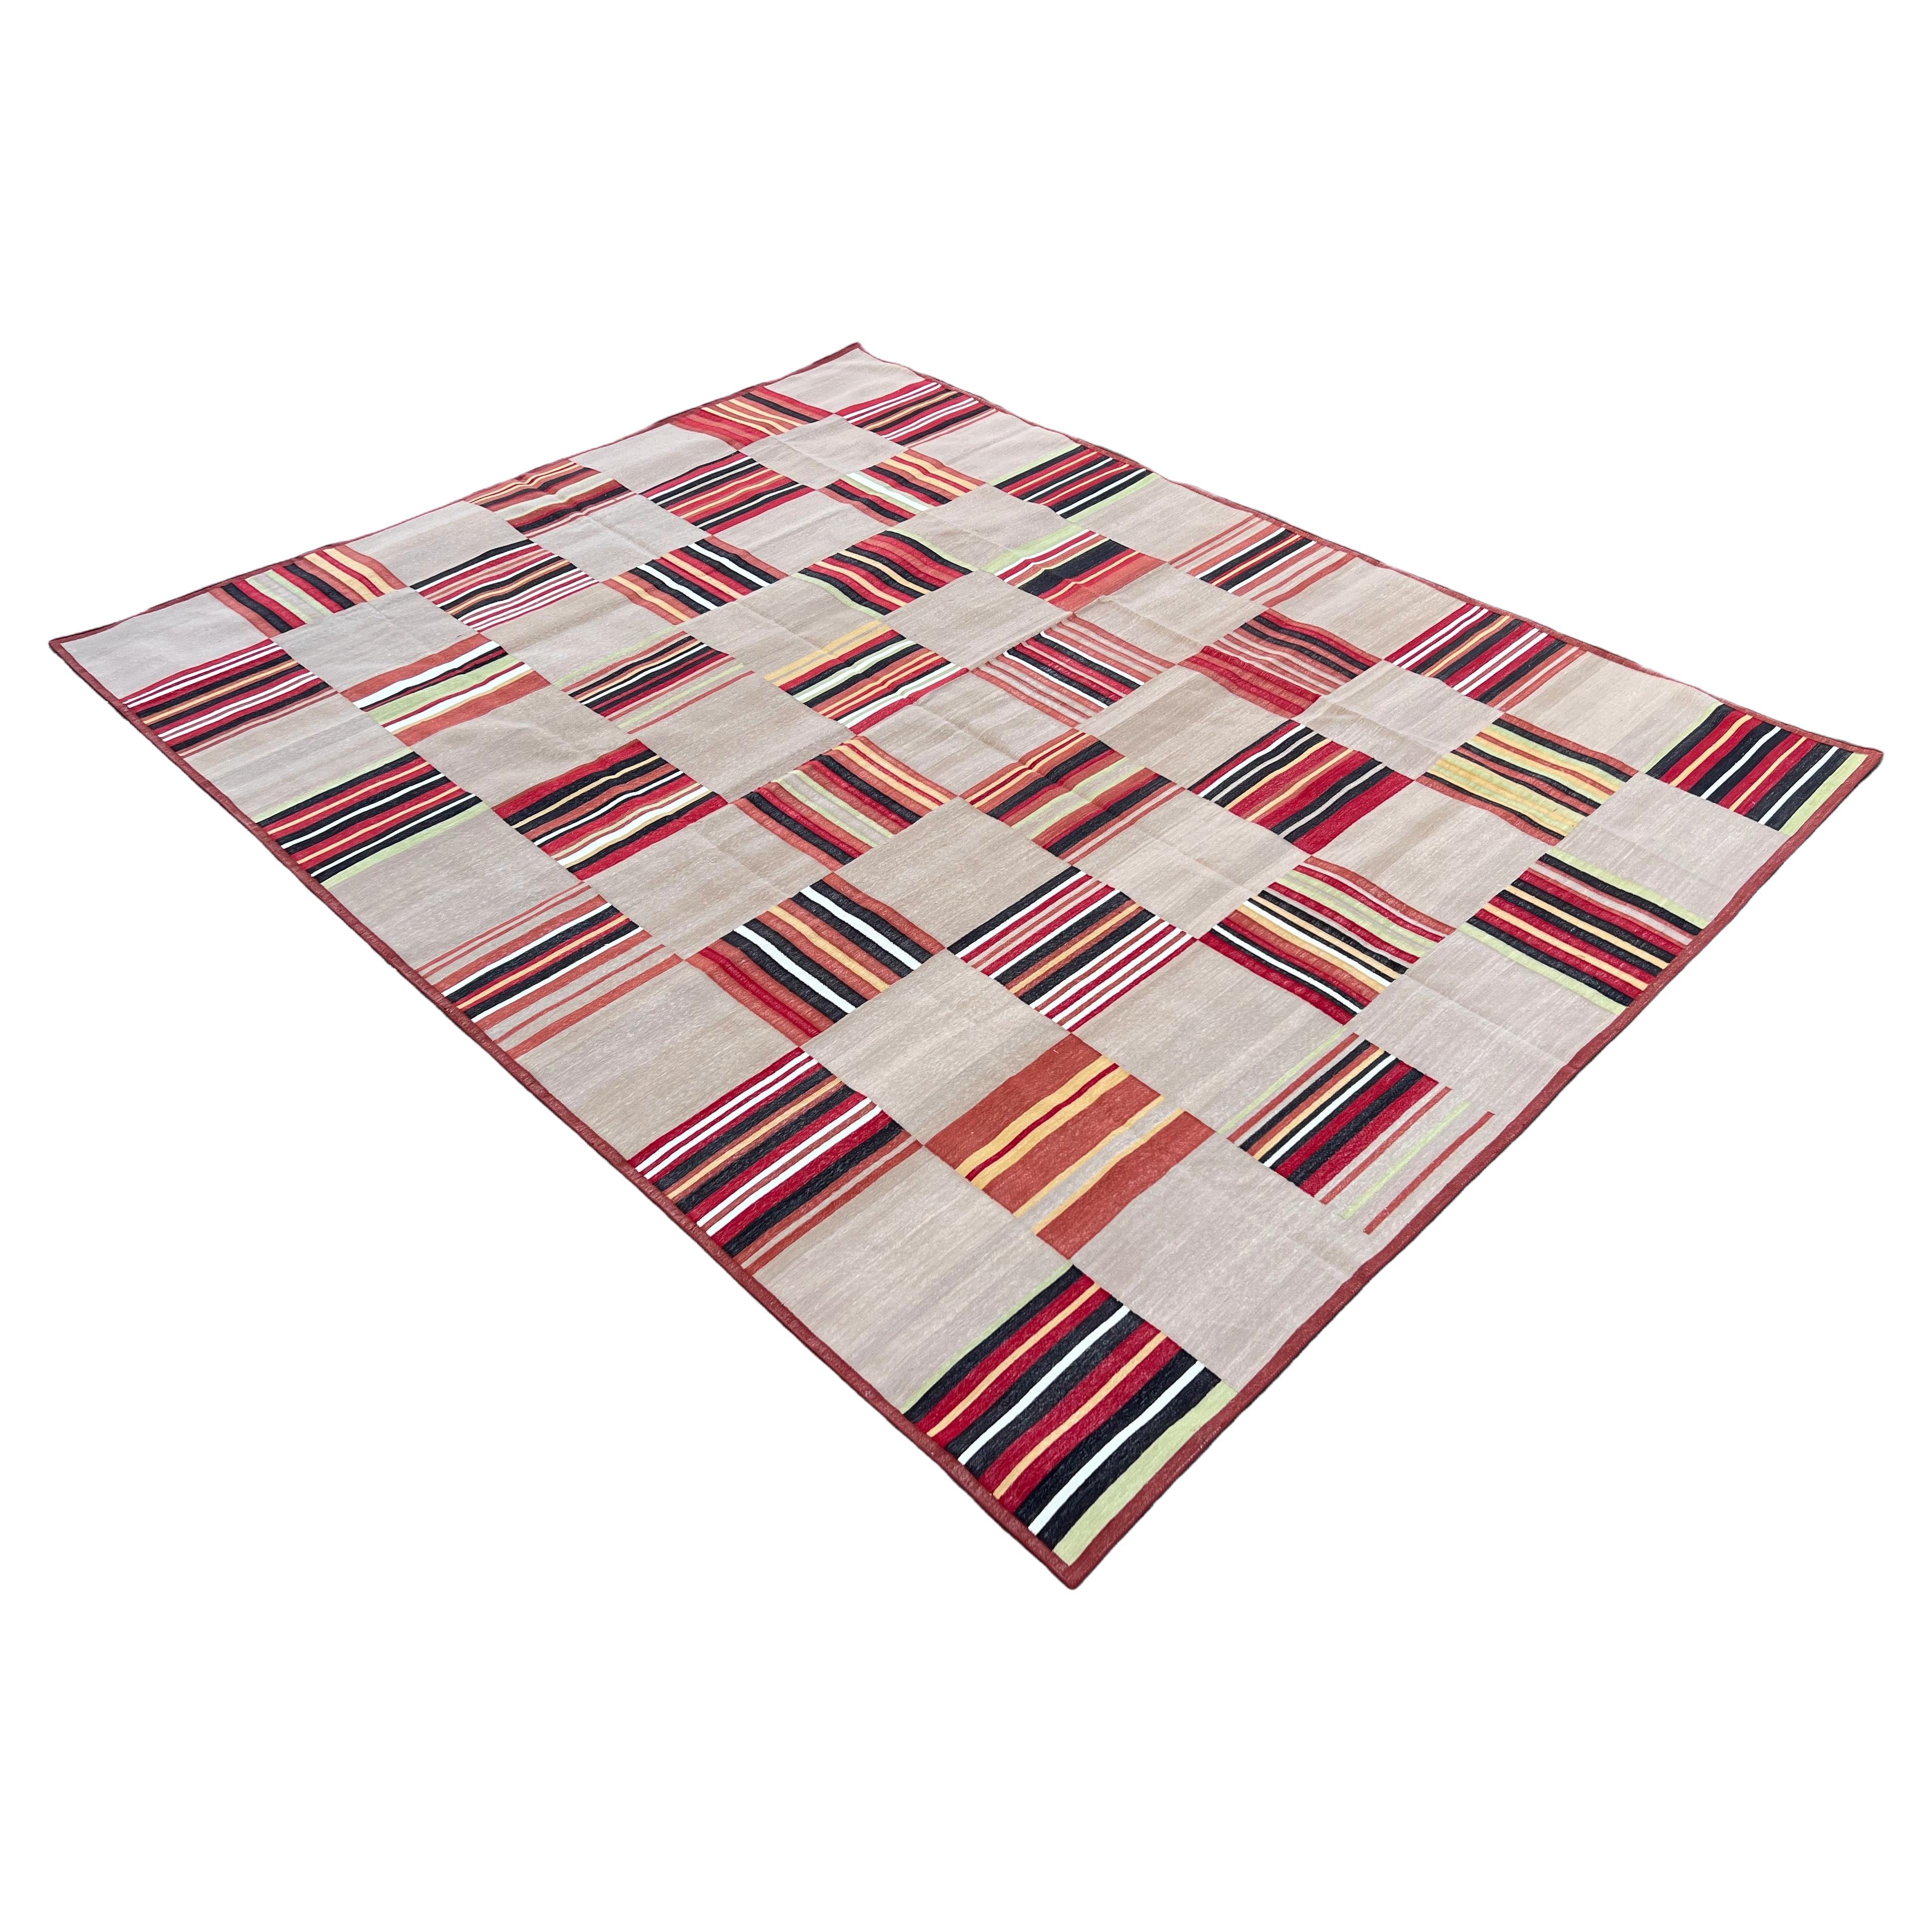 Cotton Vegetable Dyed Area Rug, Beige & Terracotta Red Tile Patterned Indian Dhurrie-9'x12'
These special flat-weave dhurries are hand-woven with 15 ply 100% cotton yarn. Due to the special manufacturing techniques used to create our rugs, the size